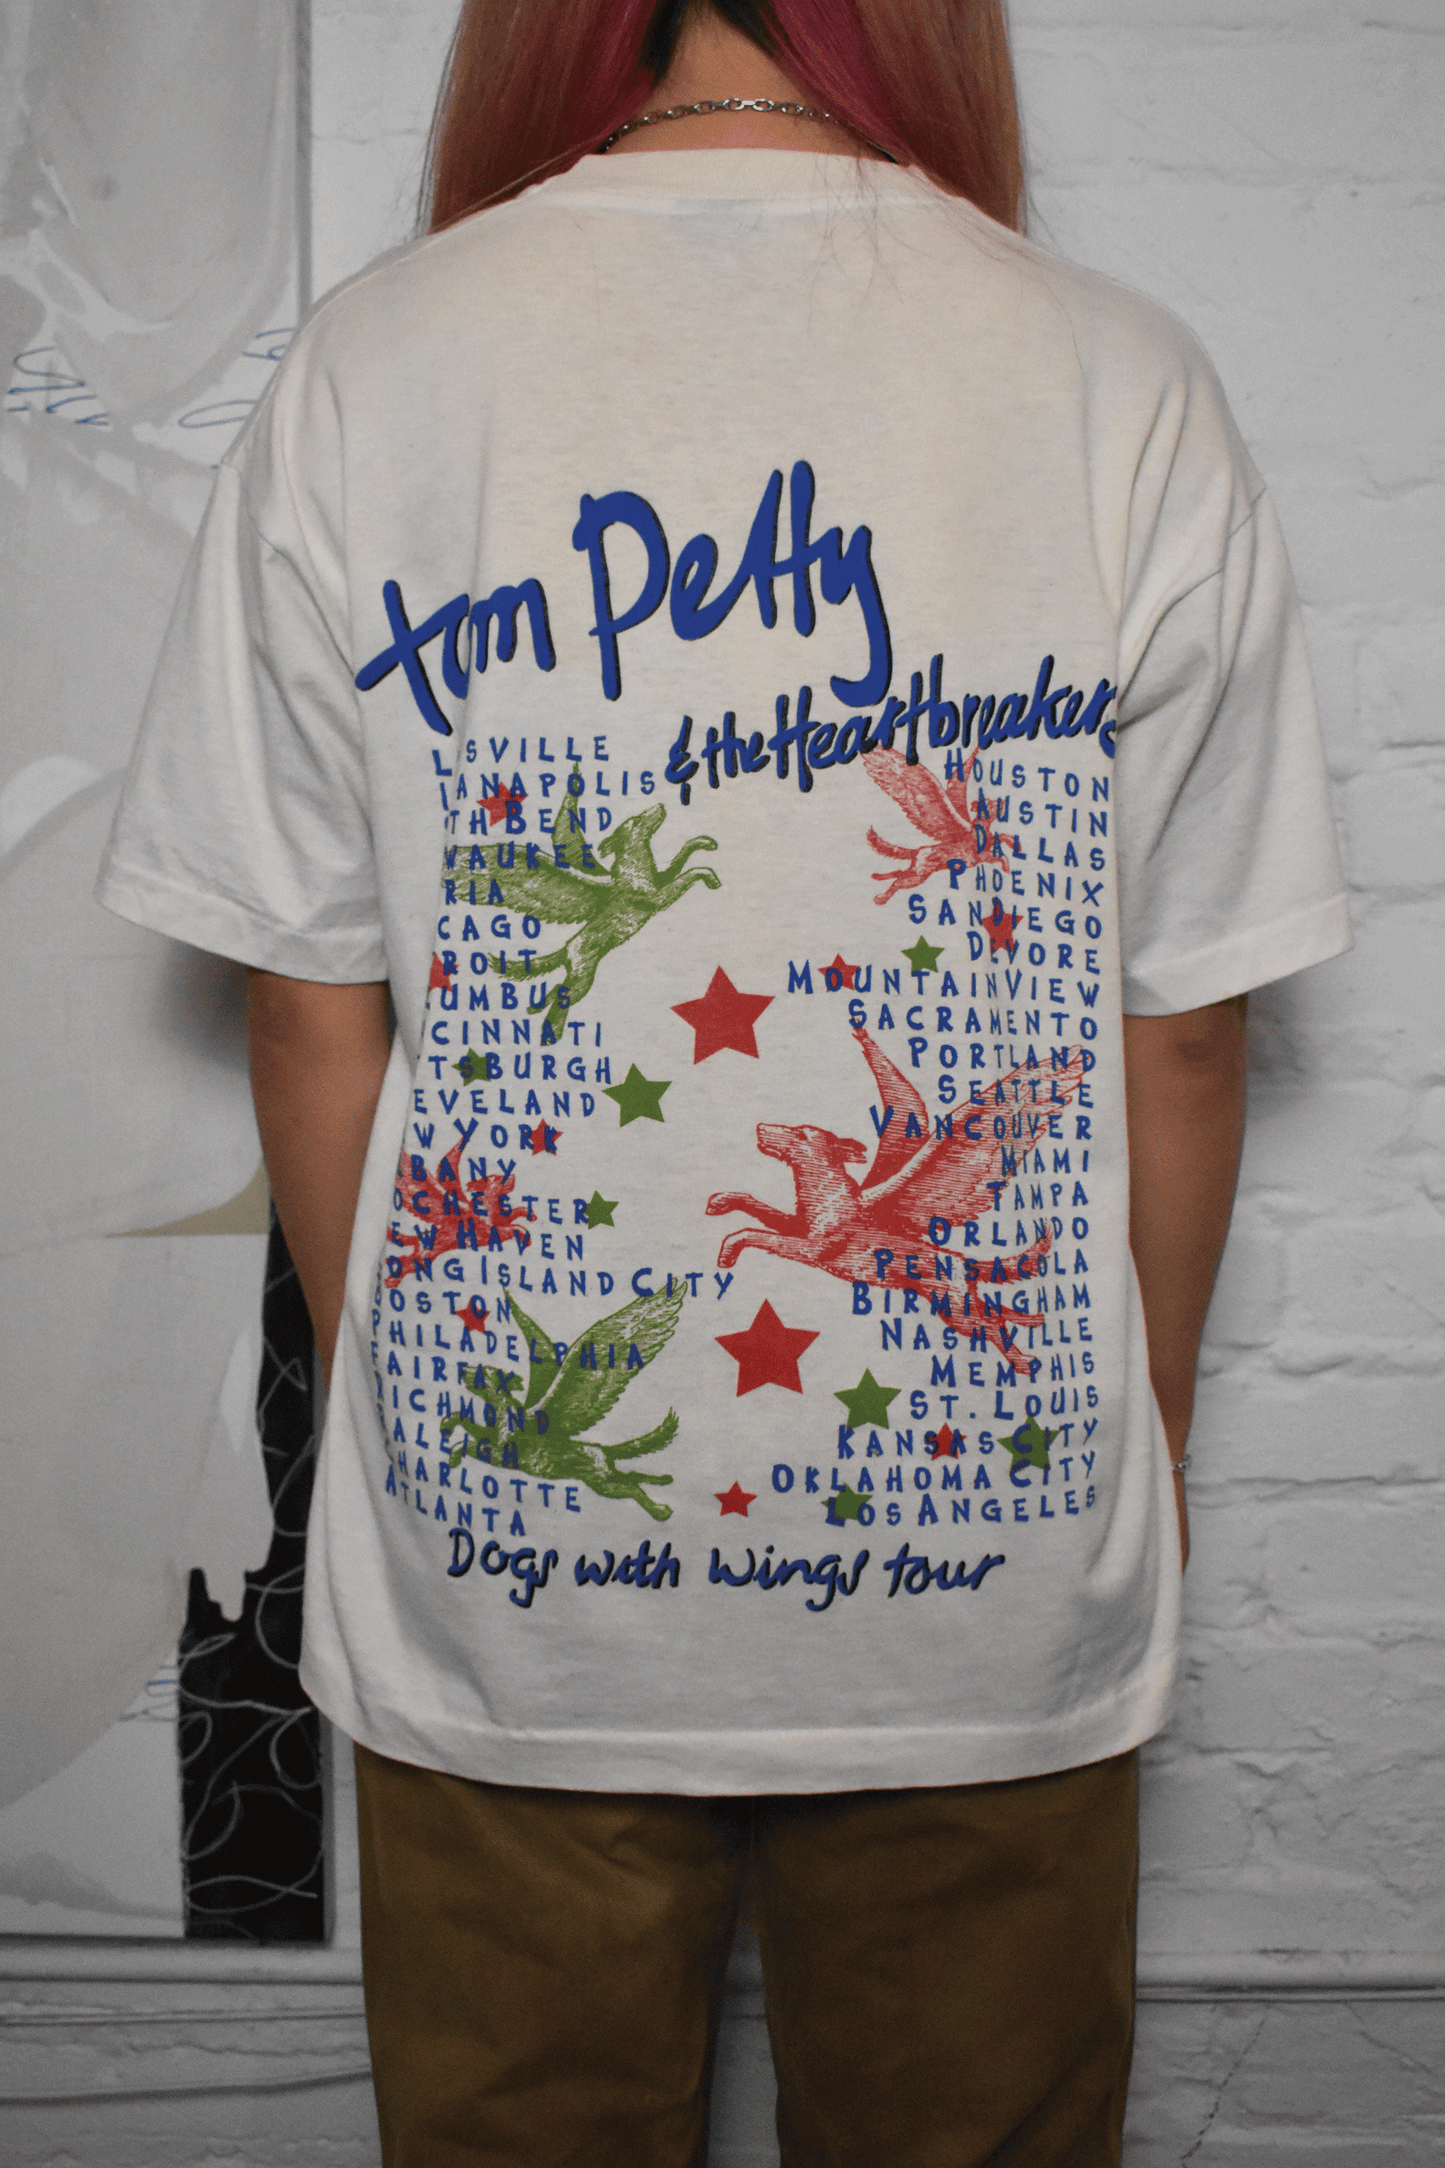 Vintage 1995 "Tom Petty & The Heart Breakers Dogs With Wings" Band Tour T-shirt